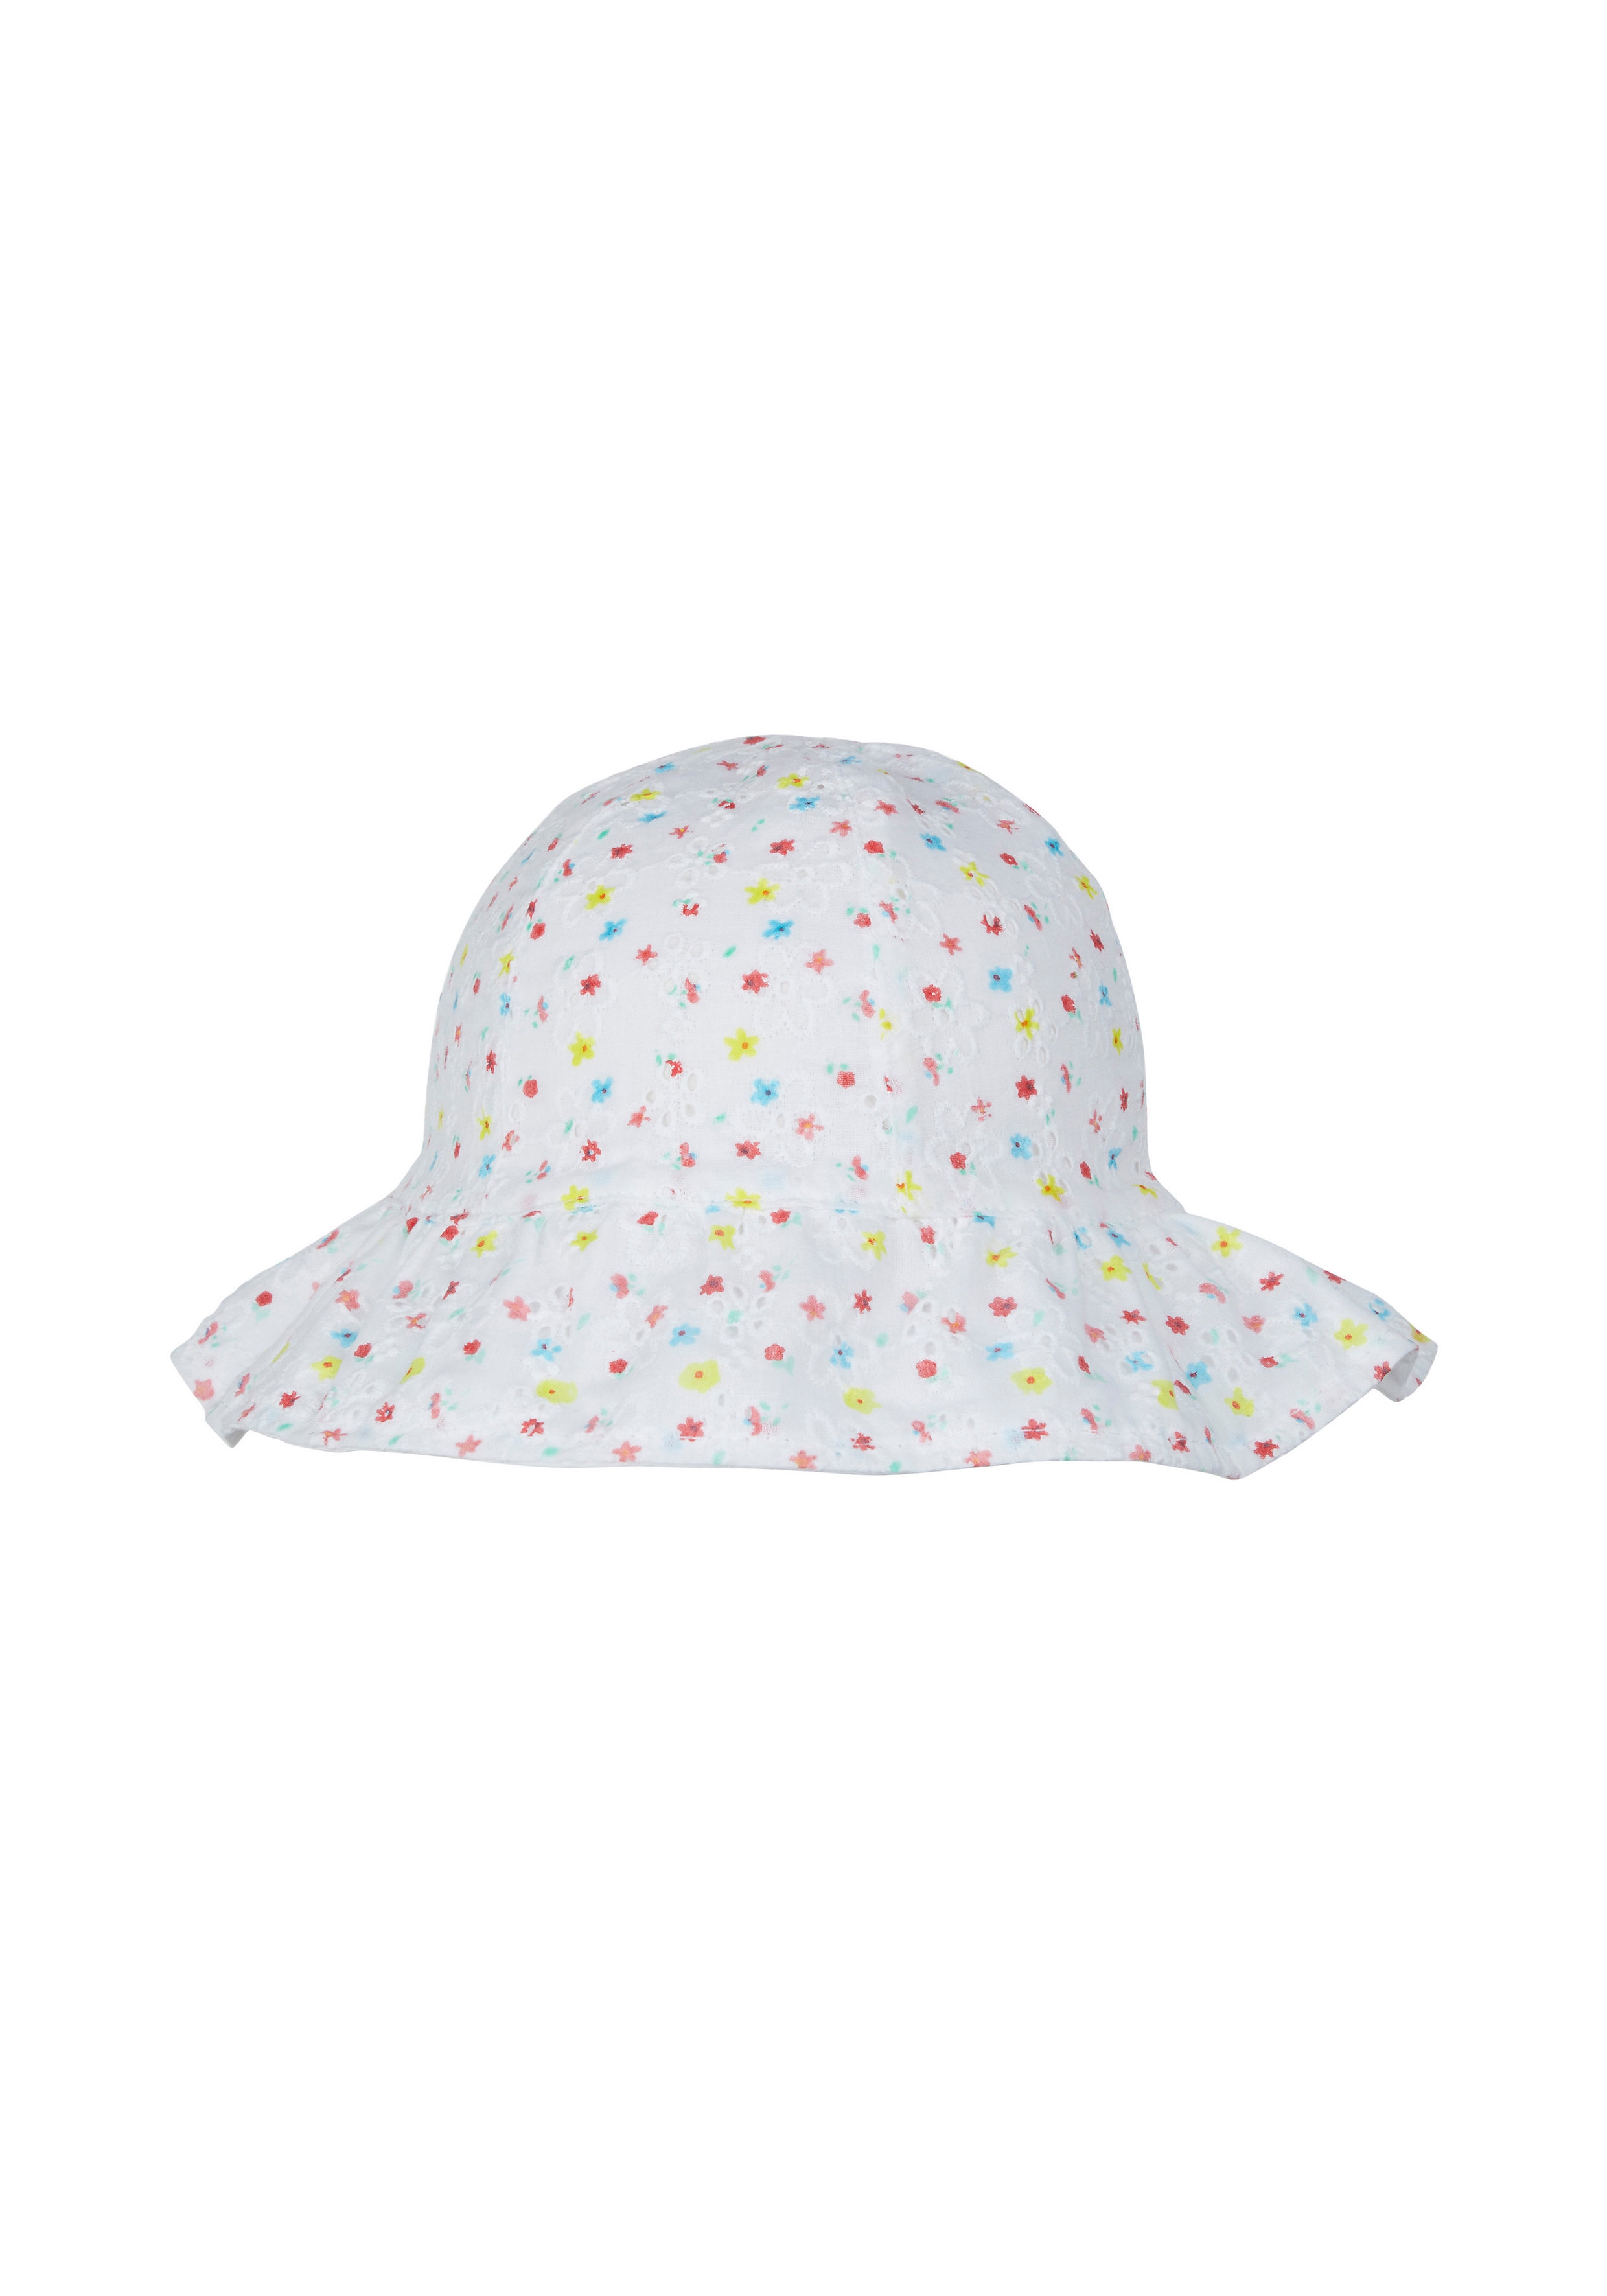 Mothercare | Girls Floral Broderie Sun Hat - White